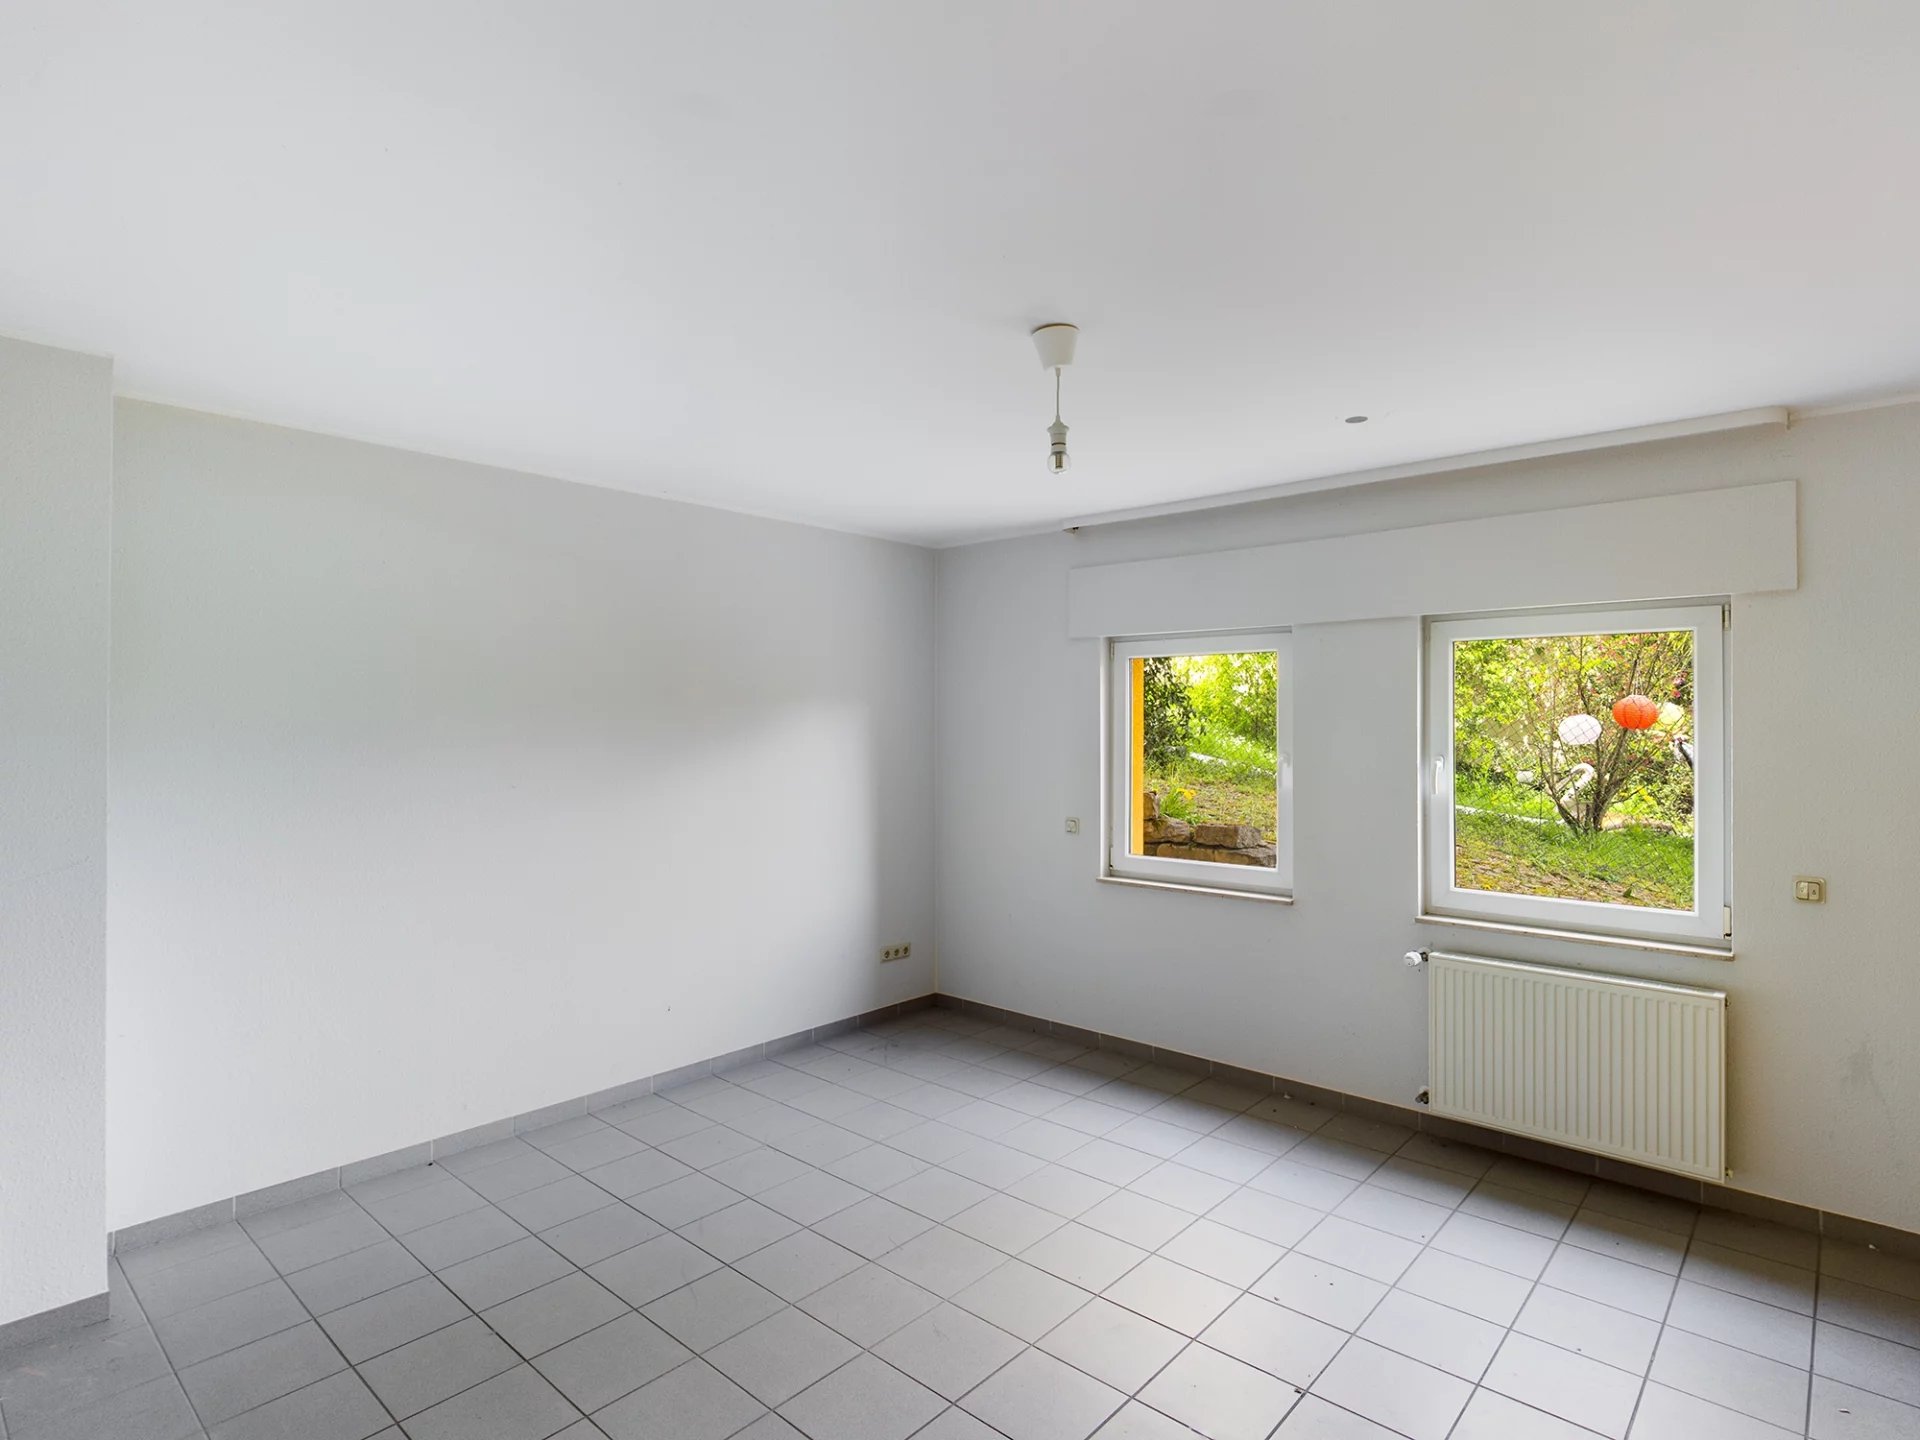 House with 5 bedroom and office for sale in Moersdorf